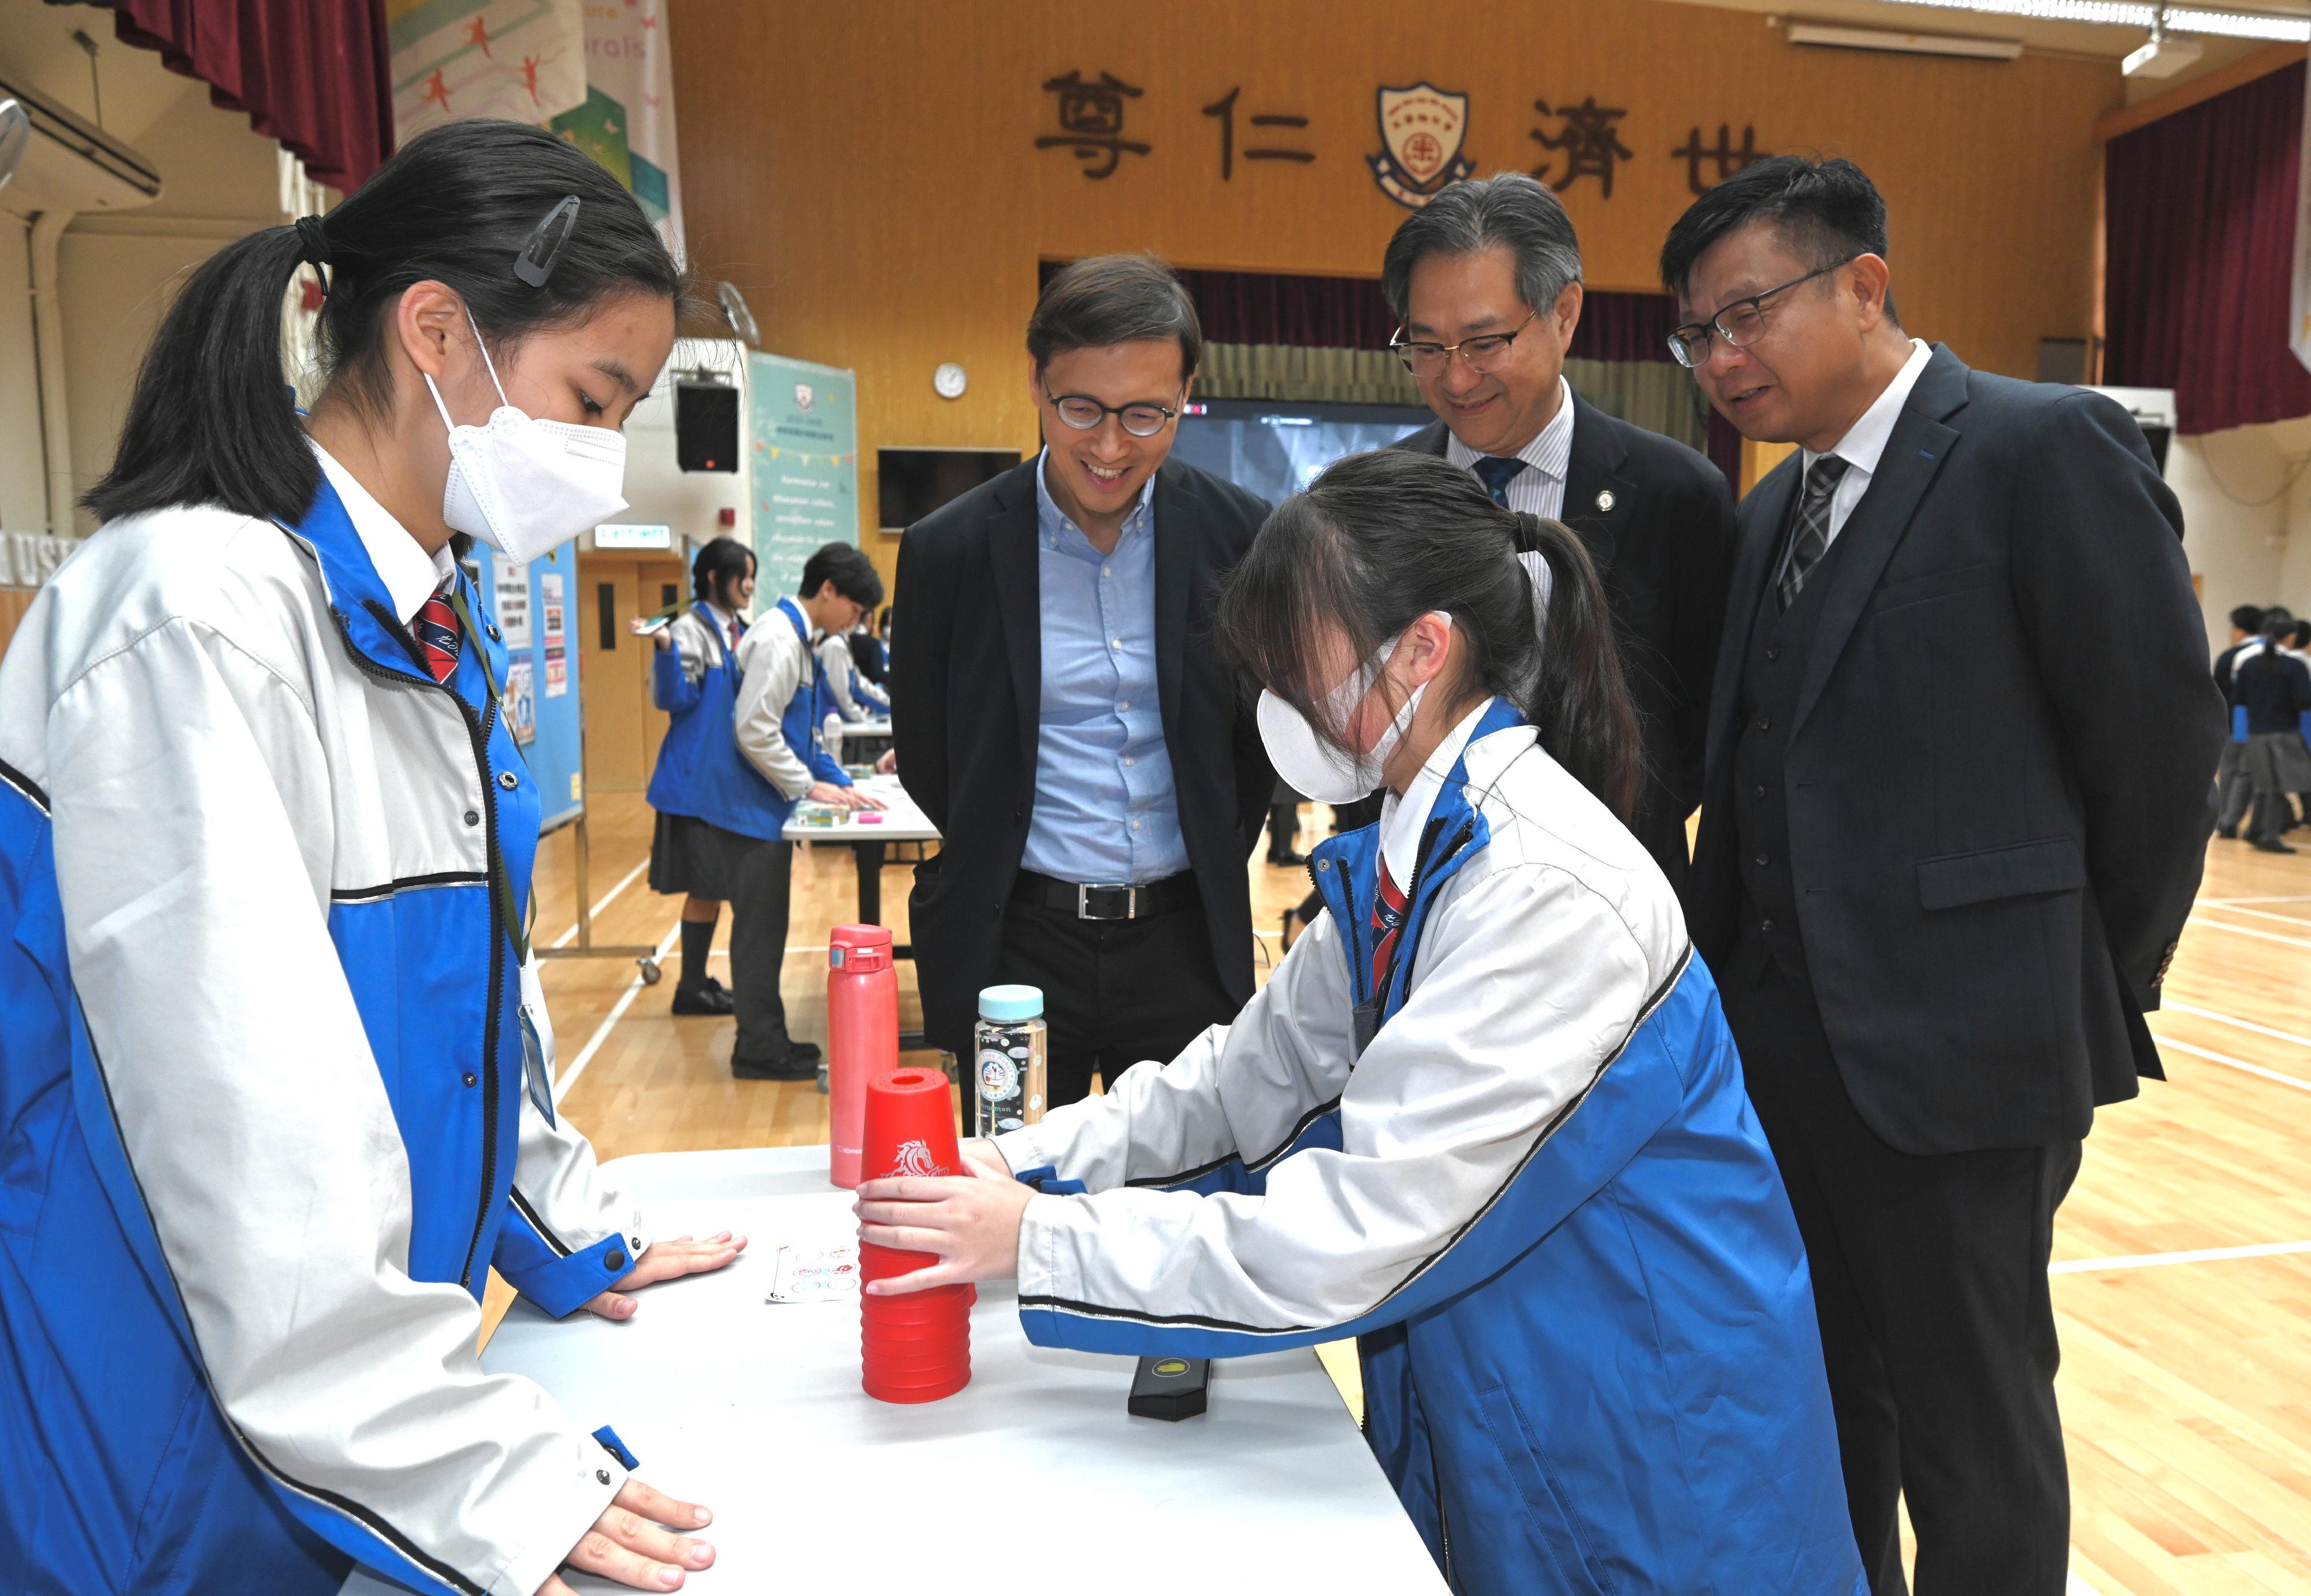 Member of the Action Committee Against Narcotics Mr Lau Chun-hung and representatives of the Narcotics Division (ND) of the Security Bureau visited today (March 7) the Yan Chai Hospital Wong Wha San Secondary School, which has participated in the Healthy School Programme for 12 years, and exchanged views with teachers and students. Picture shows Mr Lau (first right) and representatives of the ND taking part in anti-drug booth games with students.